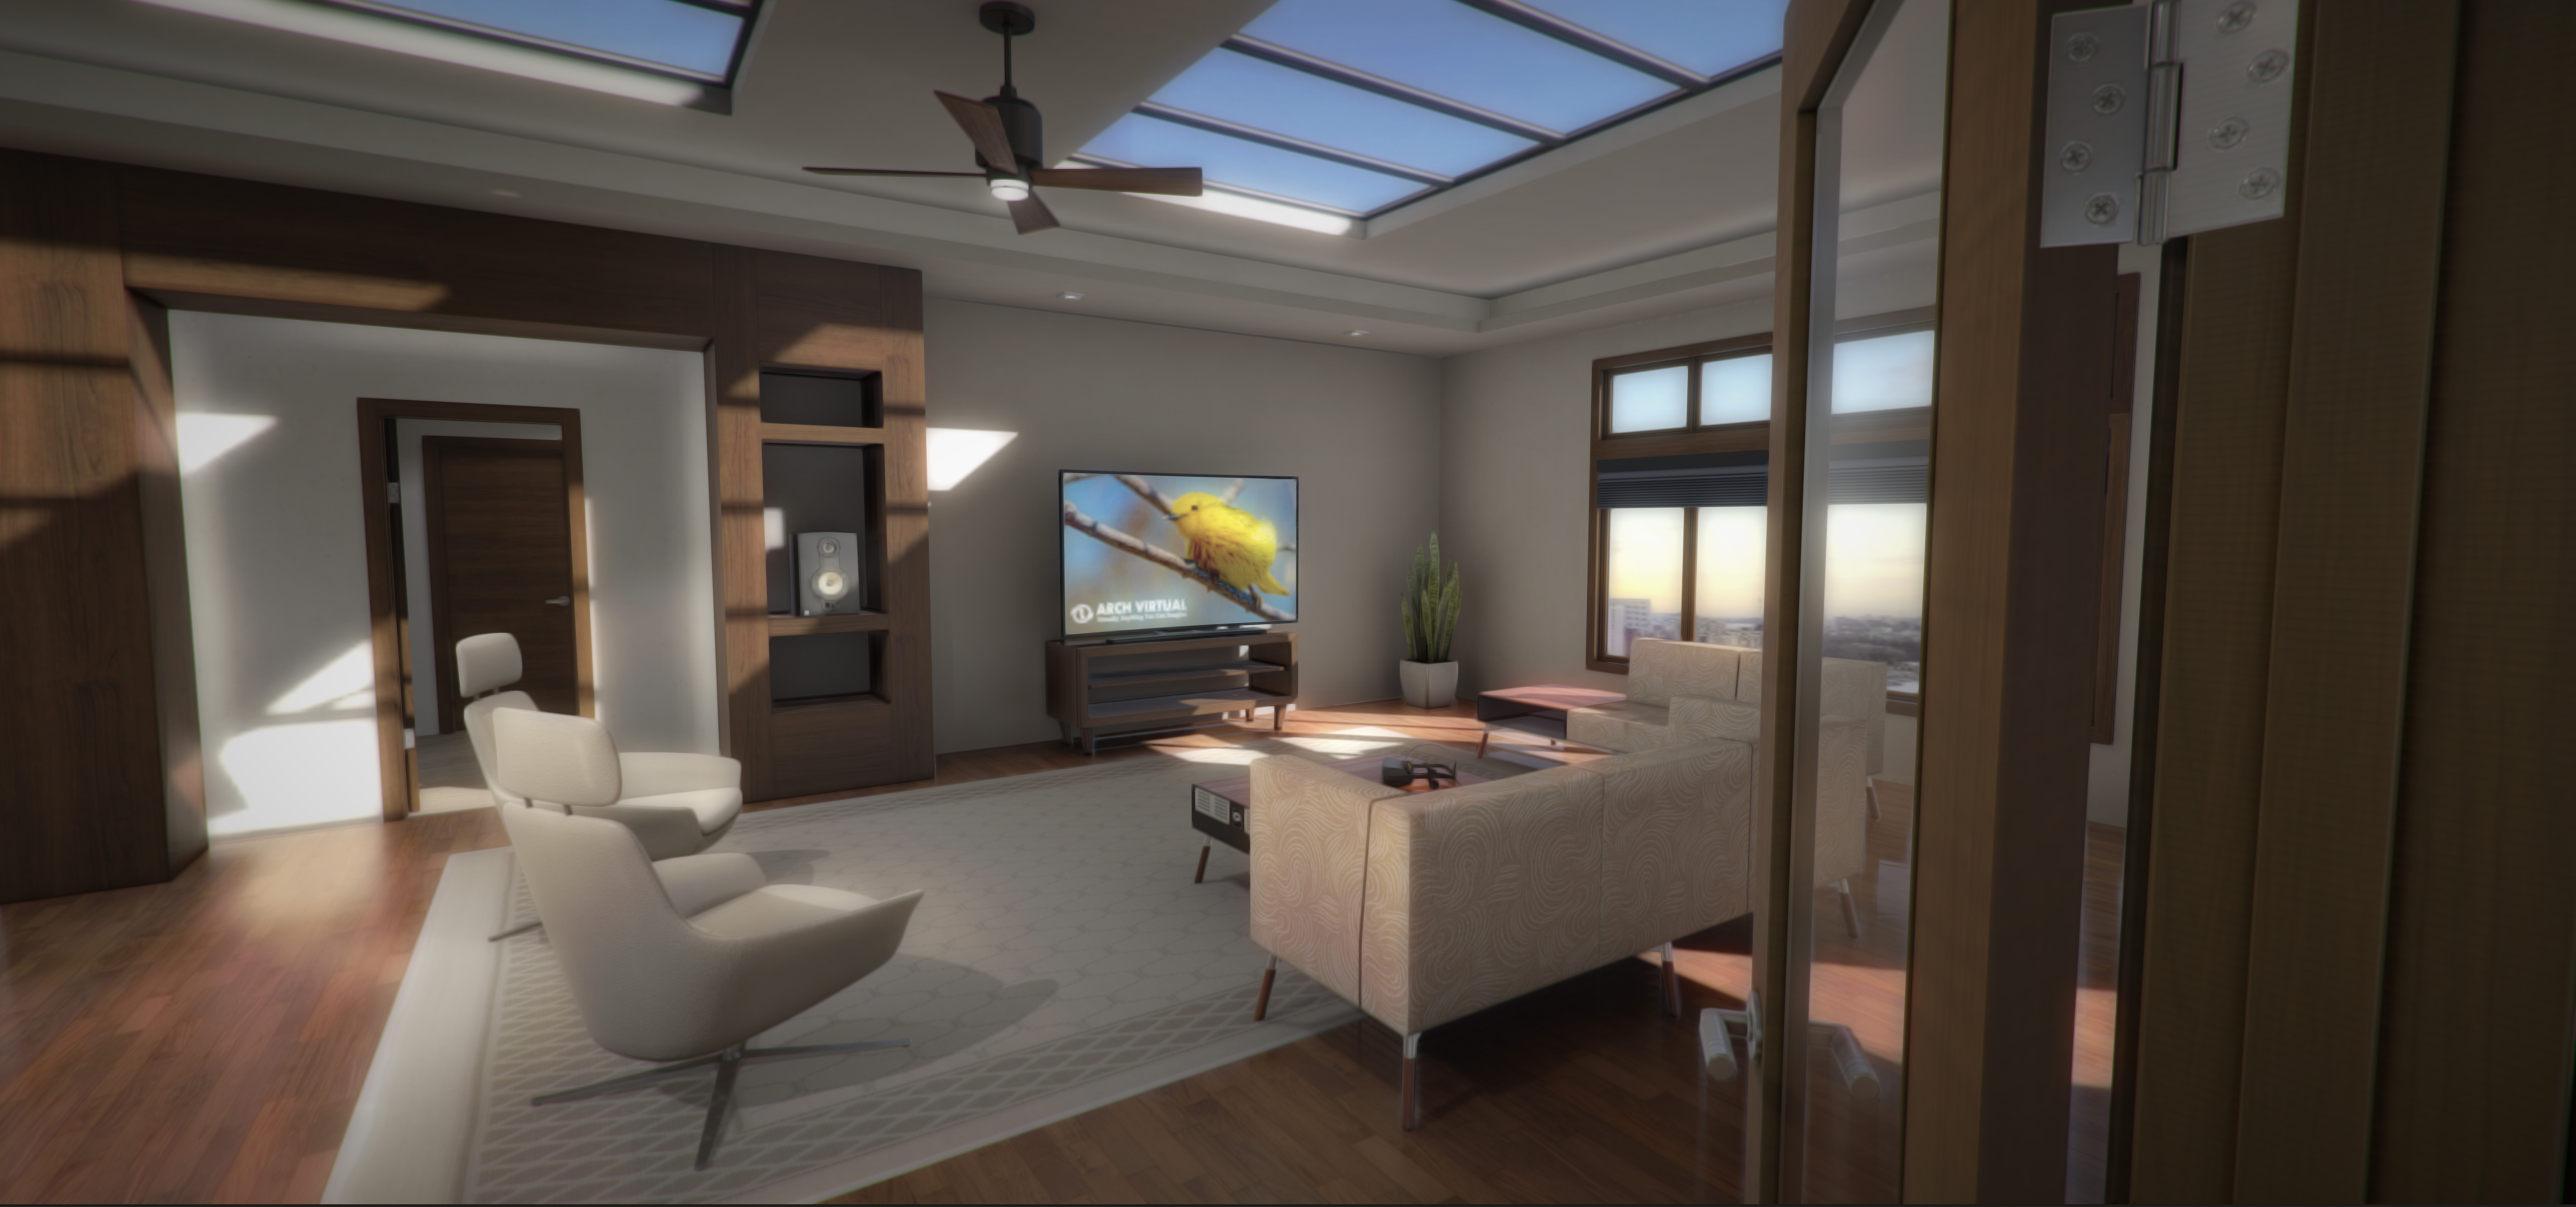 Architectural Visualization In Virtual Reality For Oculus,Free Truss Design Software